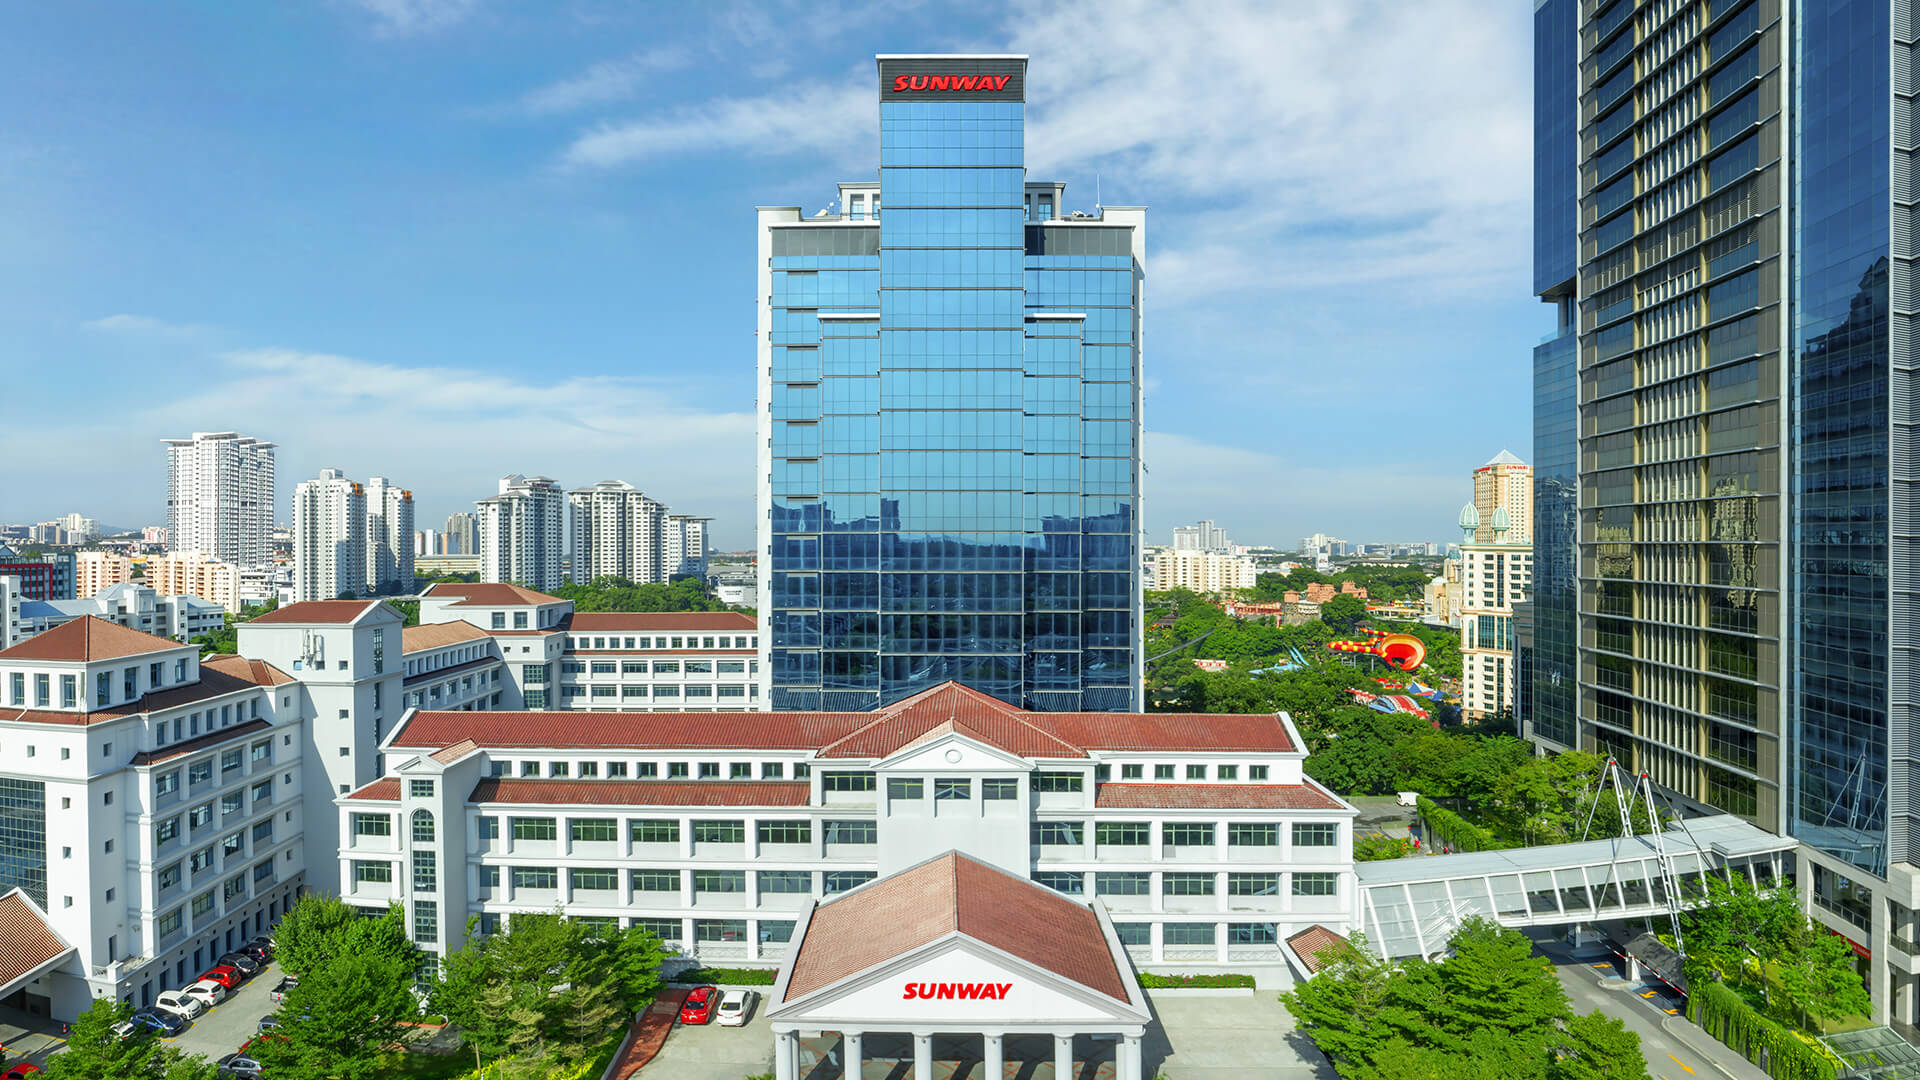 Sunway Berhad Records a Higher Profit Before Tax of RM192.0 Million in Q1 FY2023